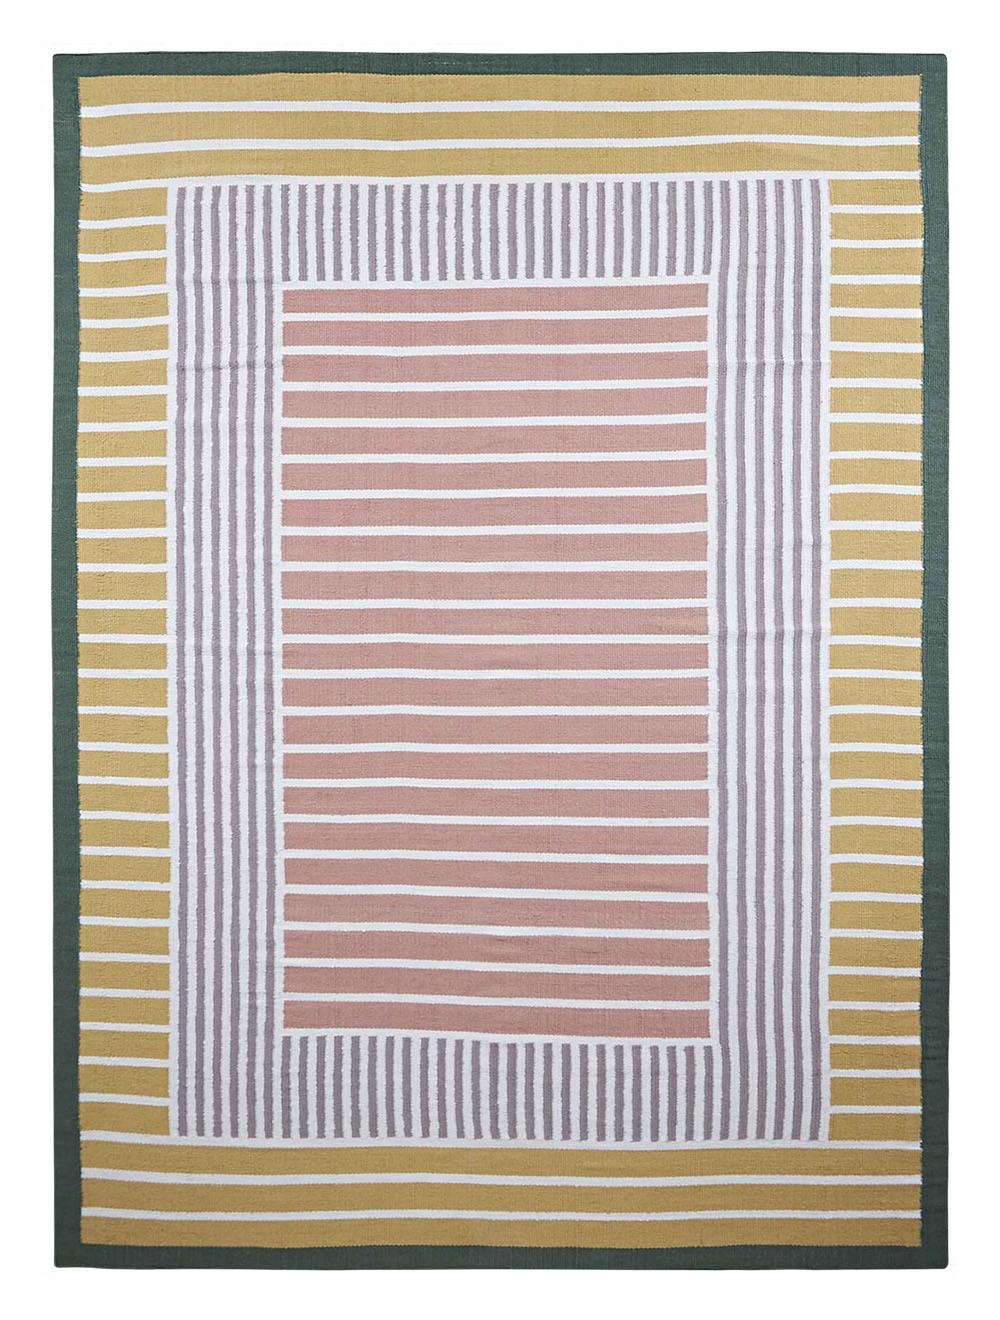 Multi Hemp Carpet by Massimo Copenhagen
Designed by Tanja Kirst
Handwoven
Materials: 100% Hemp yarn.
Dimensions: W 250 x H 350 cm.
Available colors: Multi, Red/Yellow, Nougat Rose, and Grey
Other dimensions are available: 200x300 cm.

The